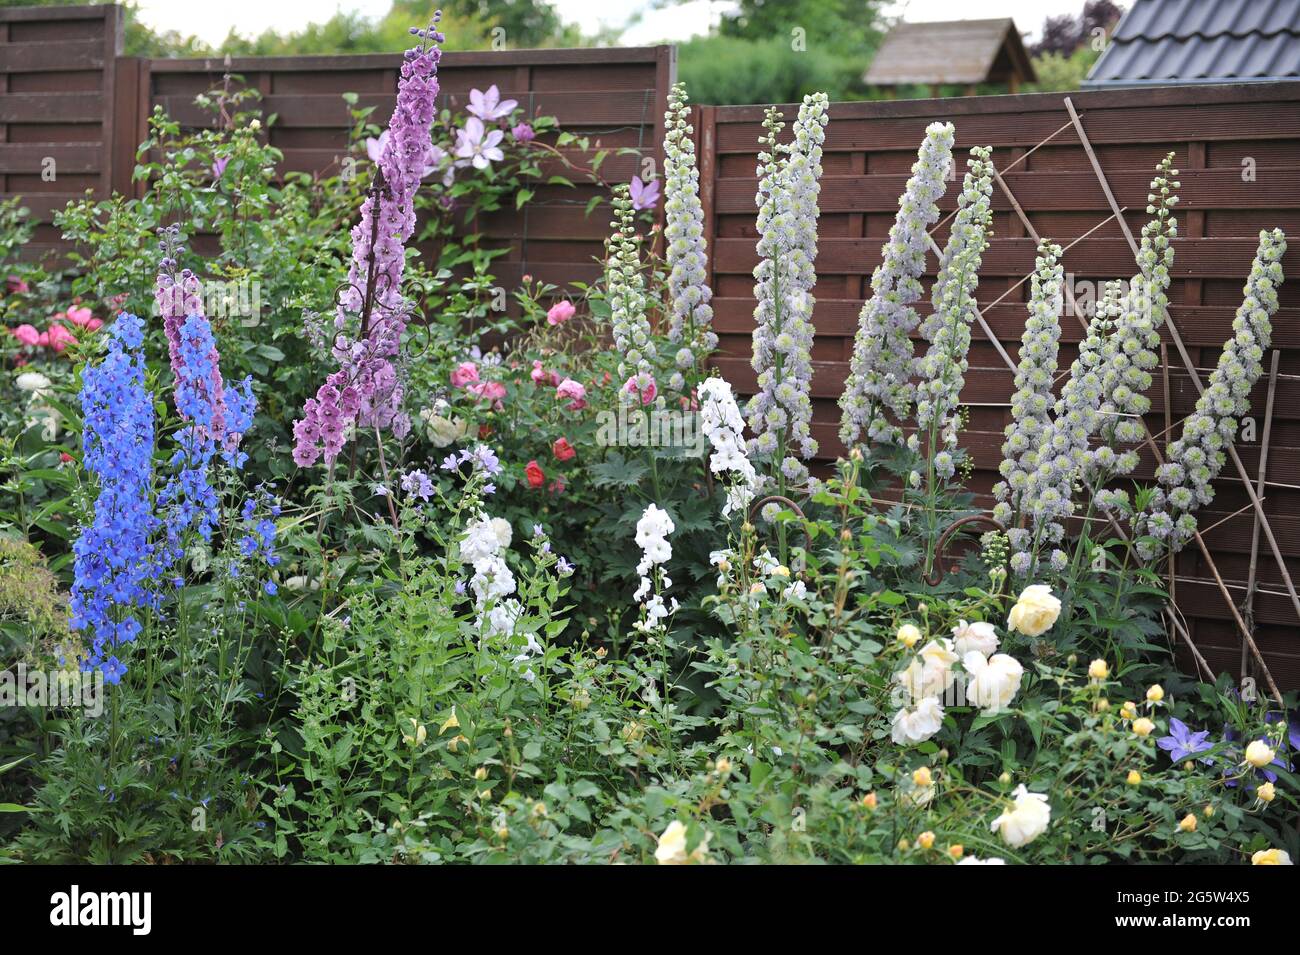 Blue, pink and white larkspurs (Delphinium) blooms in a garden in June Stock Photo